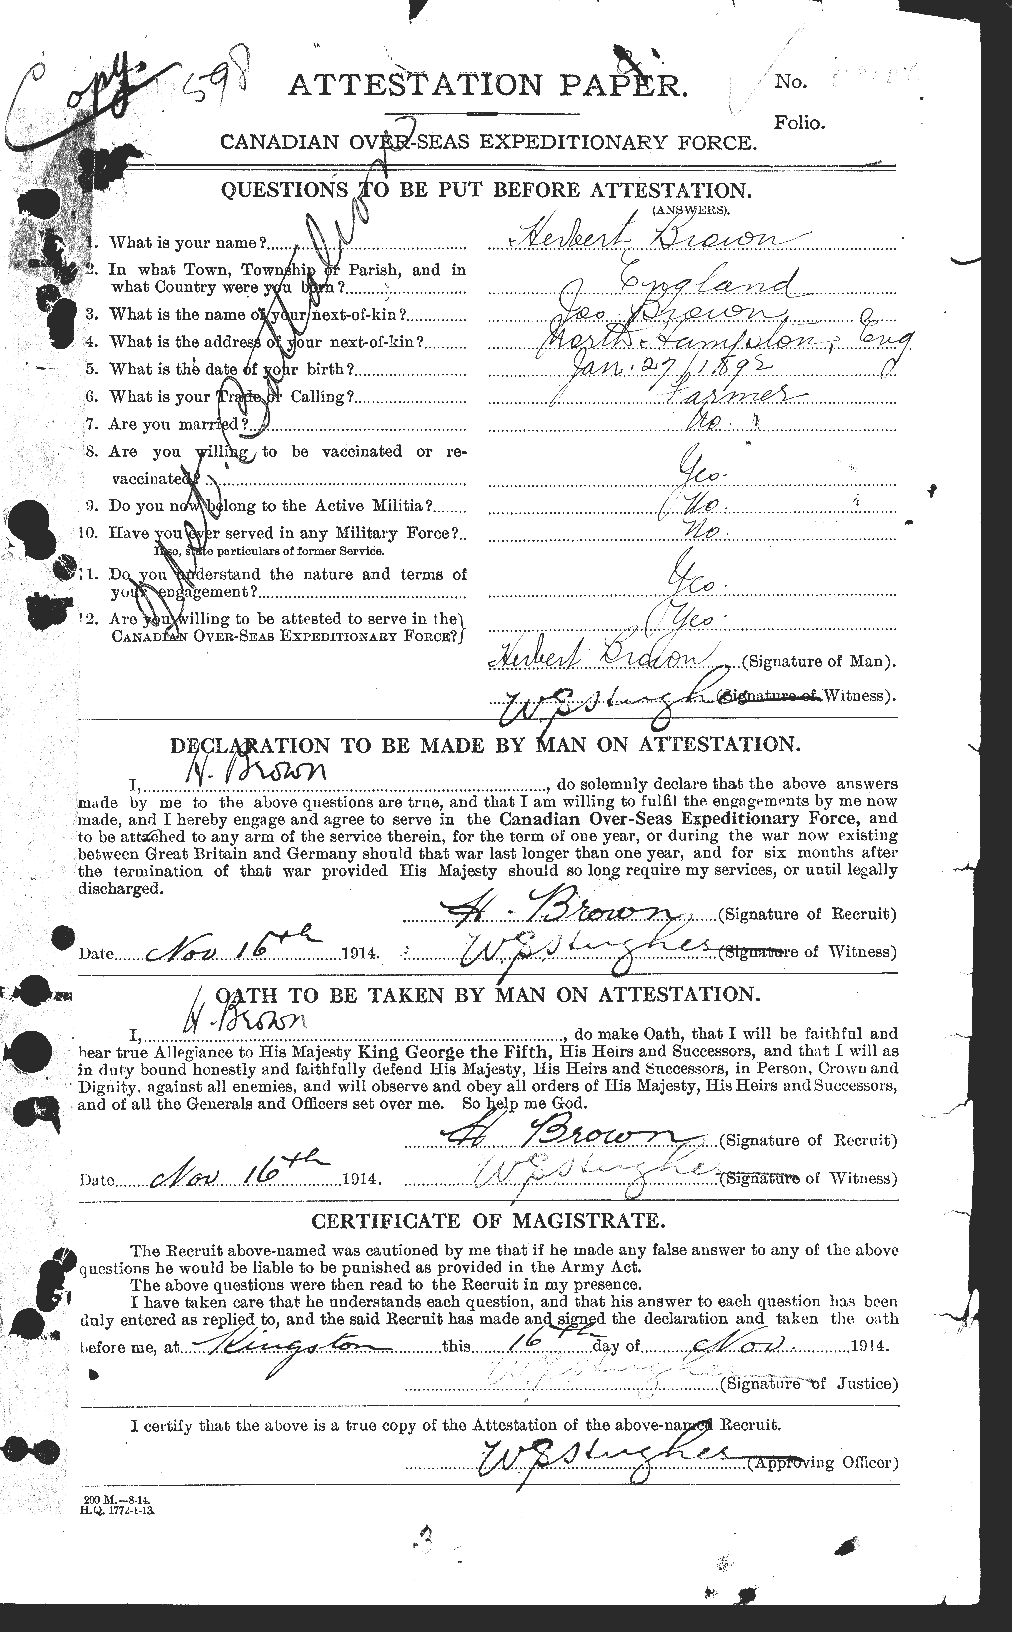 Personnel Records of the First World War - CEF 265553a